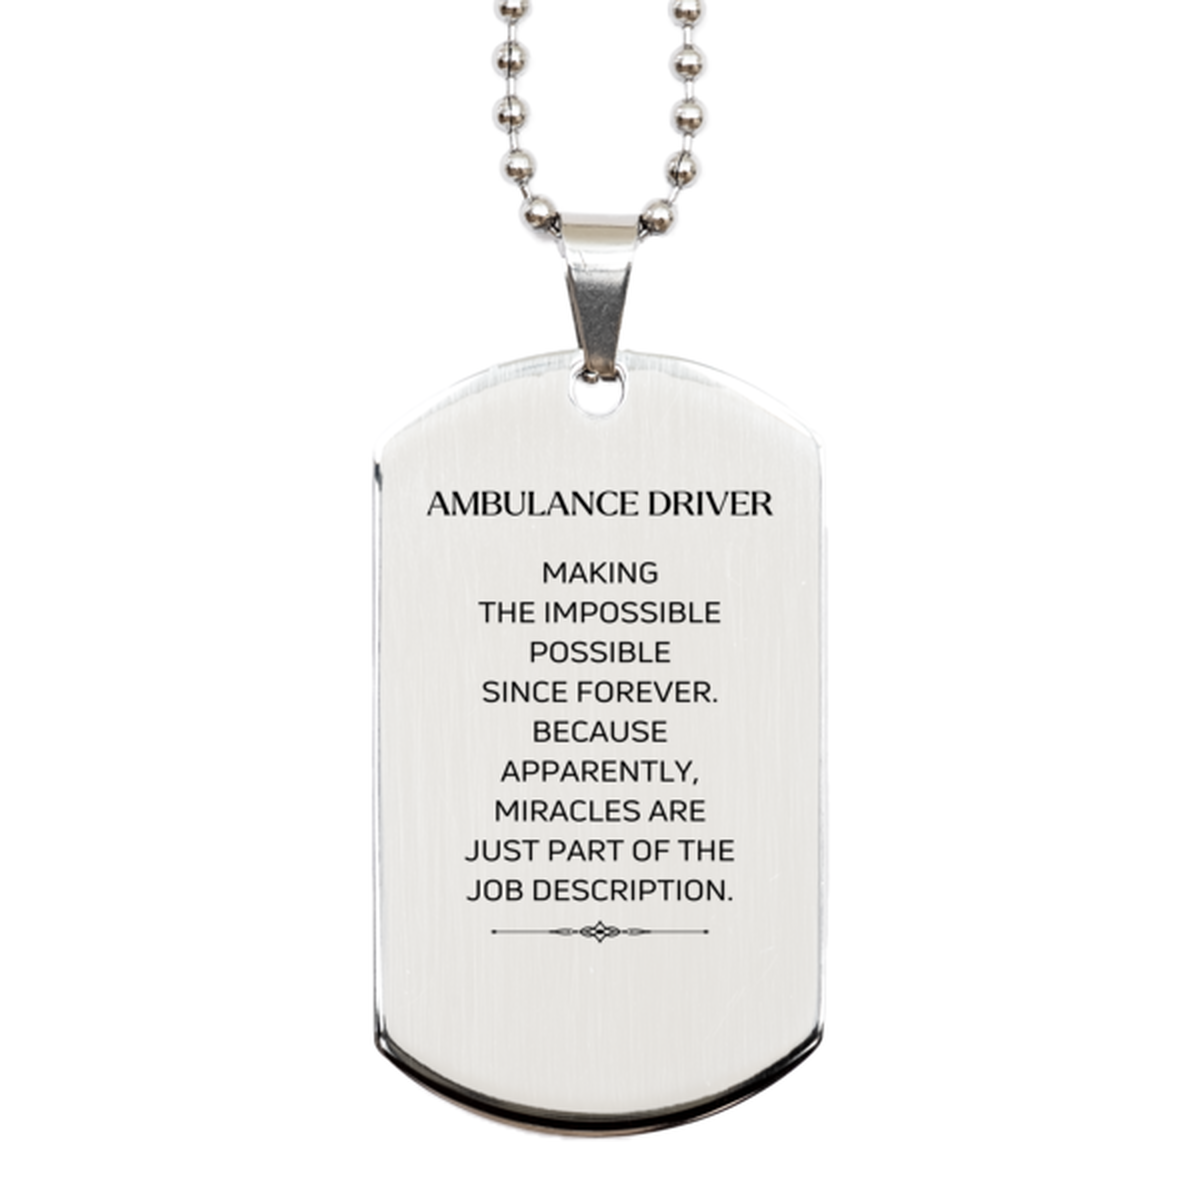 Funny Ambulance Driver Gifts, Miracles are just part of the job description, Inspirational Birthday Silver Dog Tag For Ambulance Driver, Men, Women, Coworkers, Friends, Boss